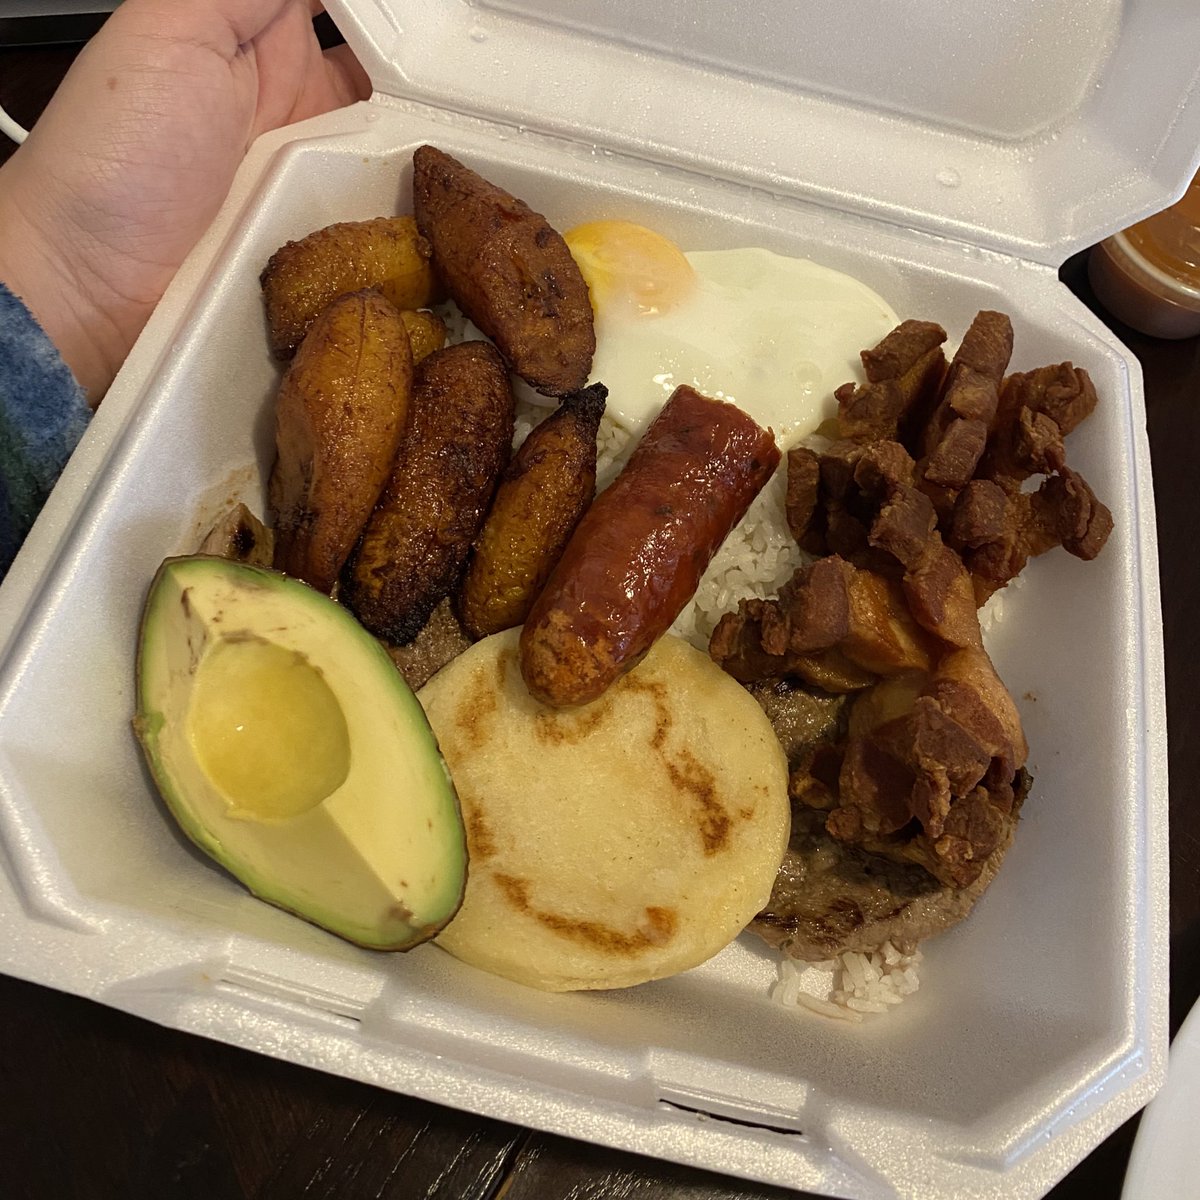 Day 46: look at this colombian food